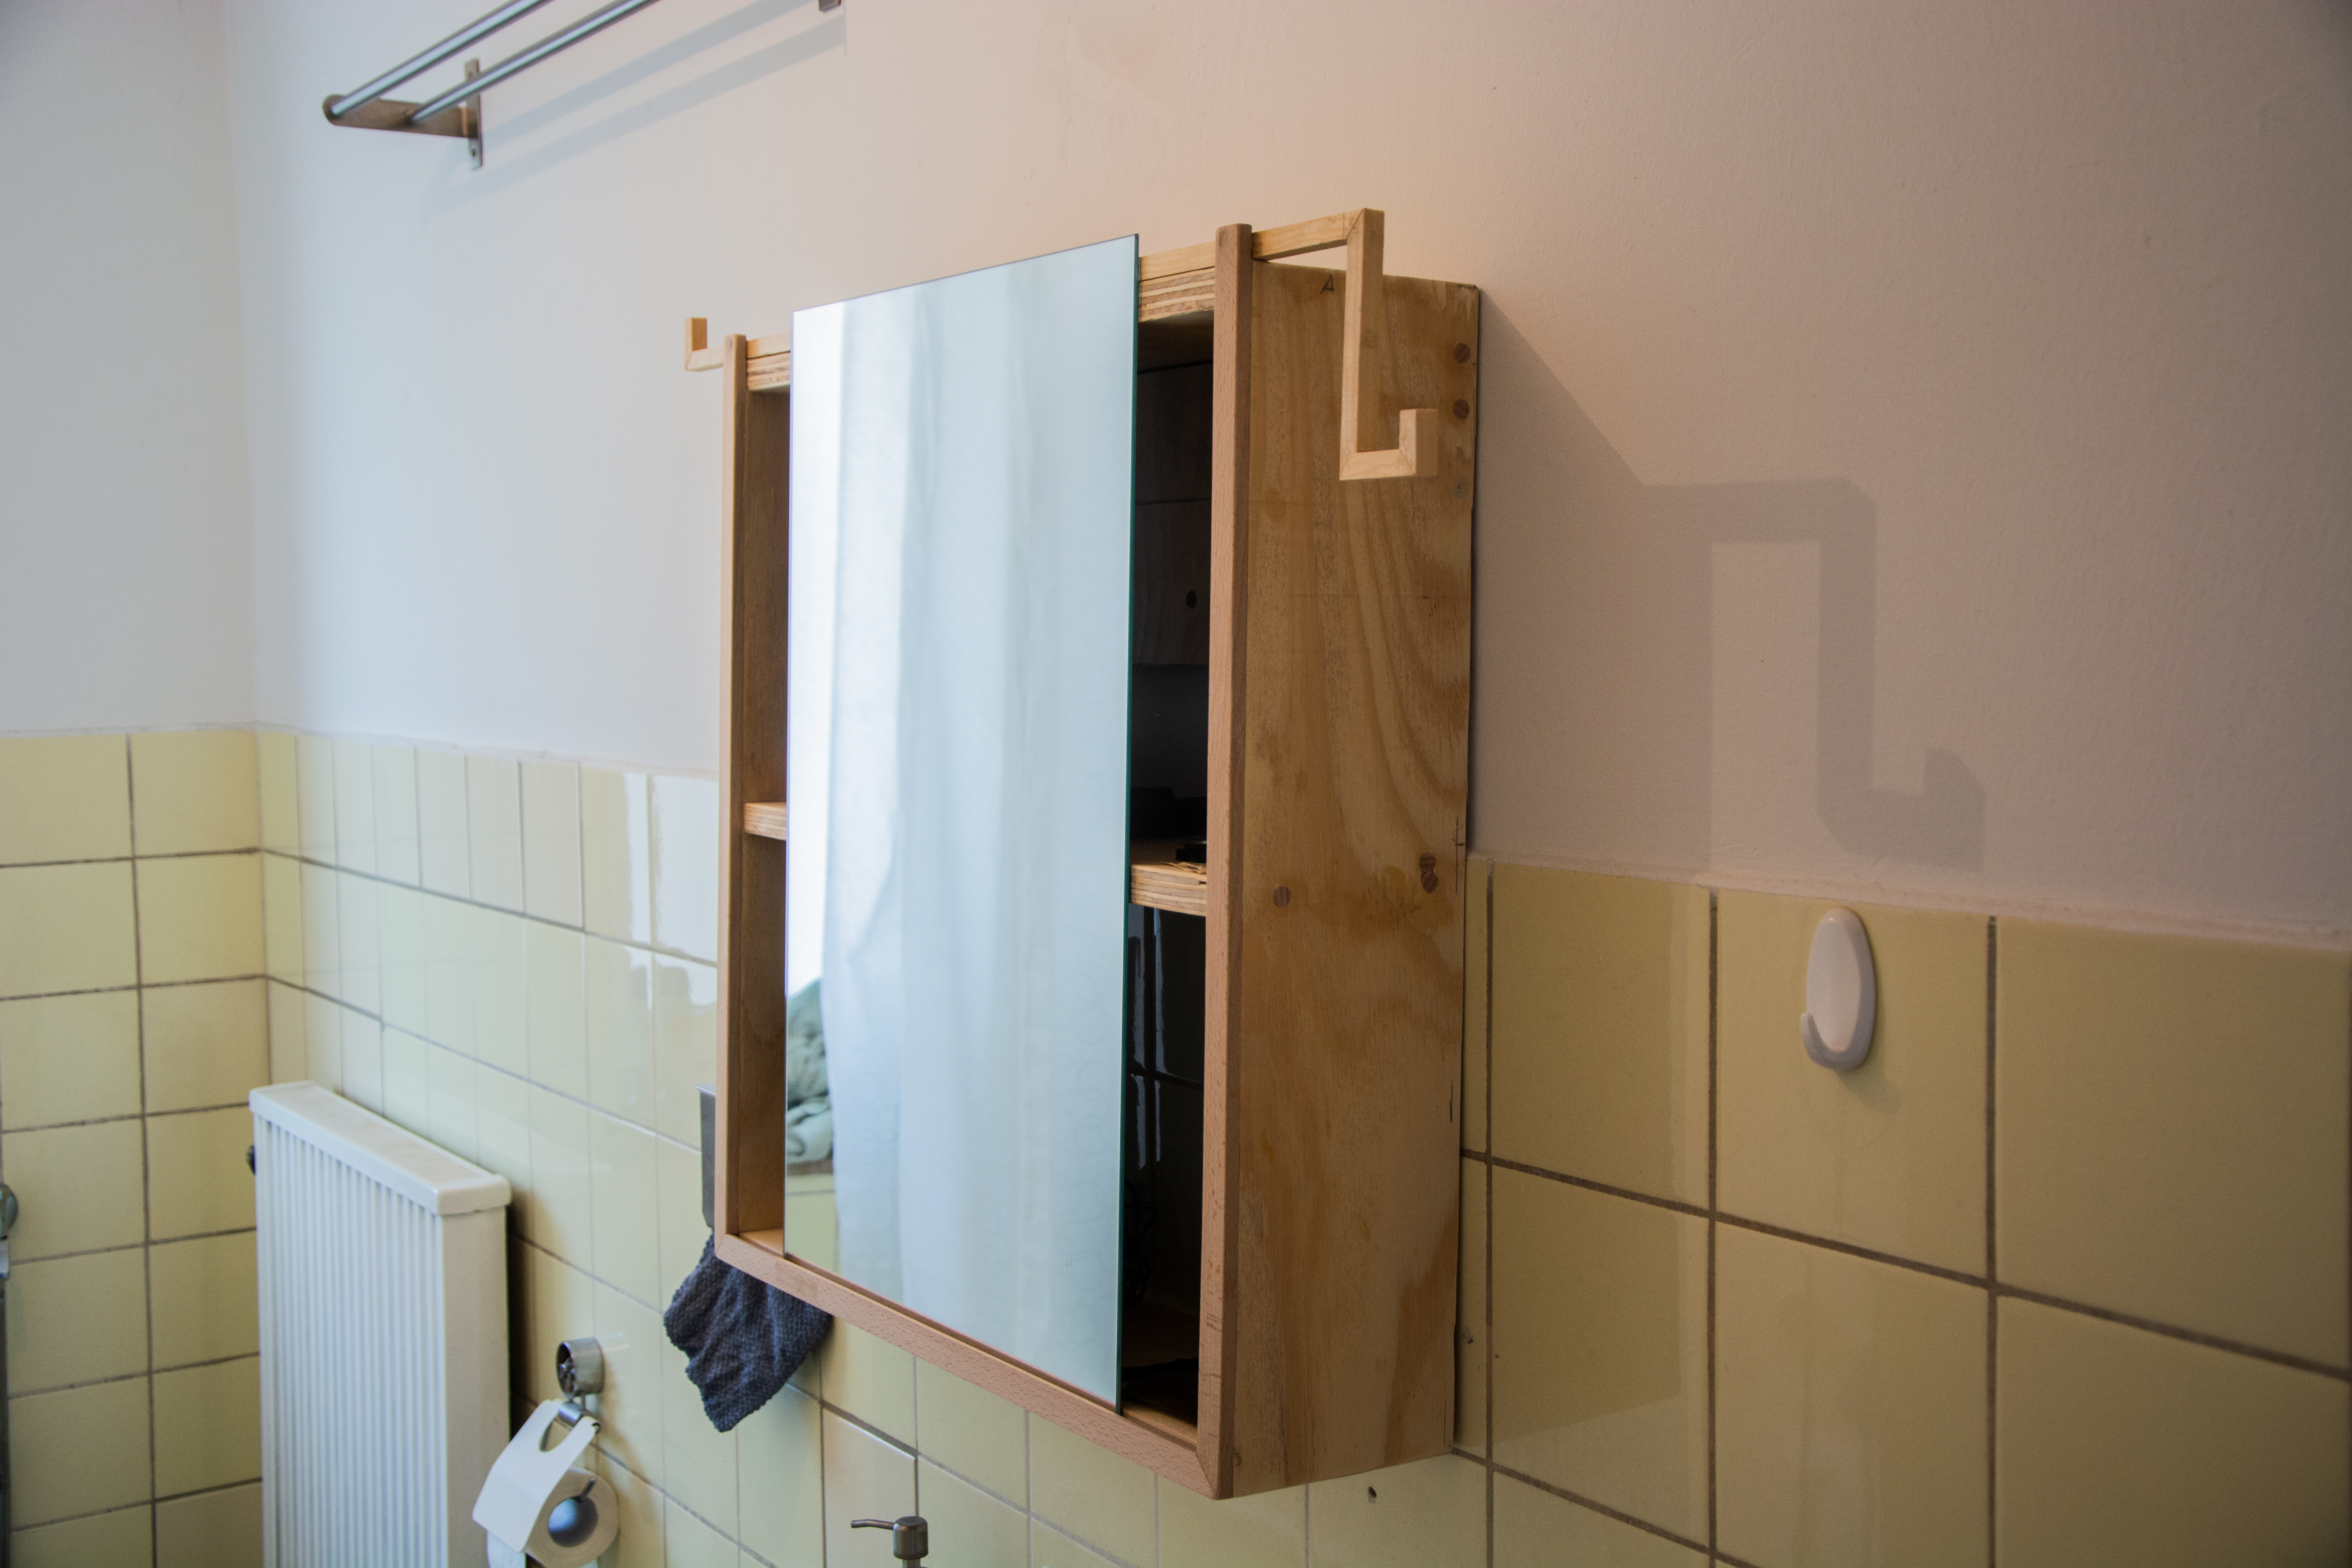 Bathroom Furniture from one sheet of plywood